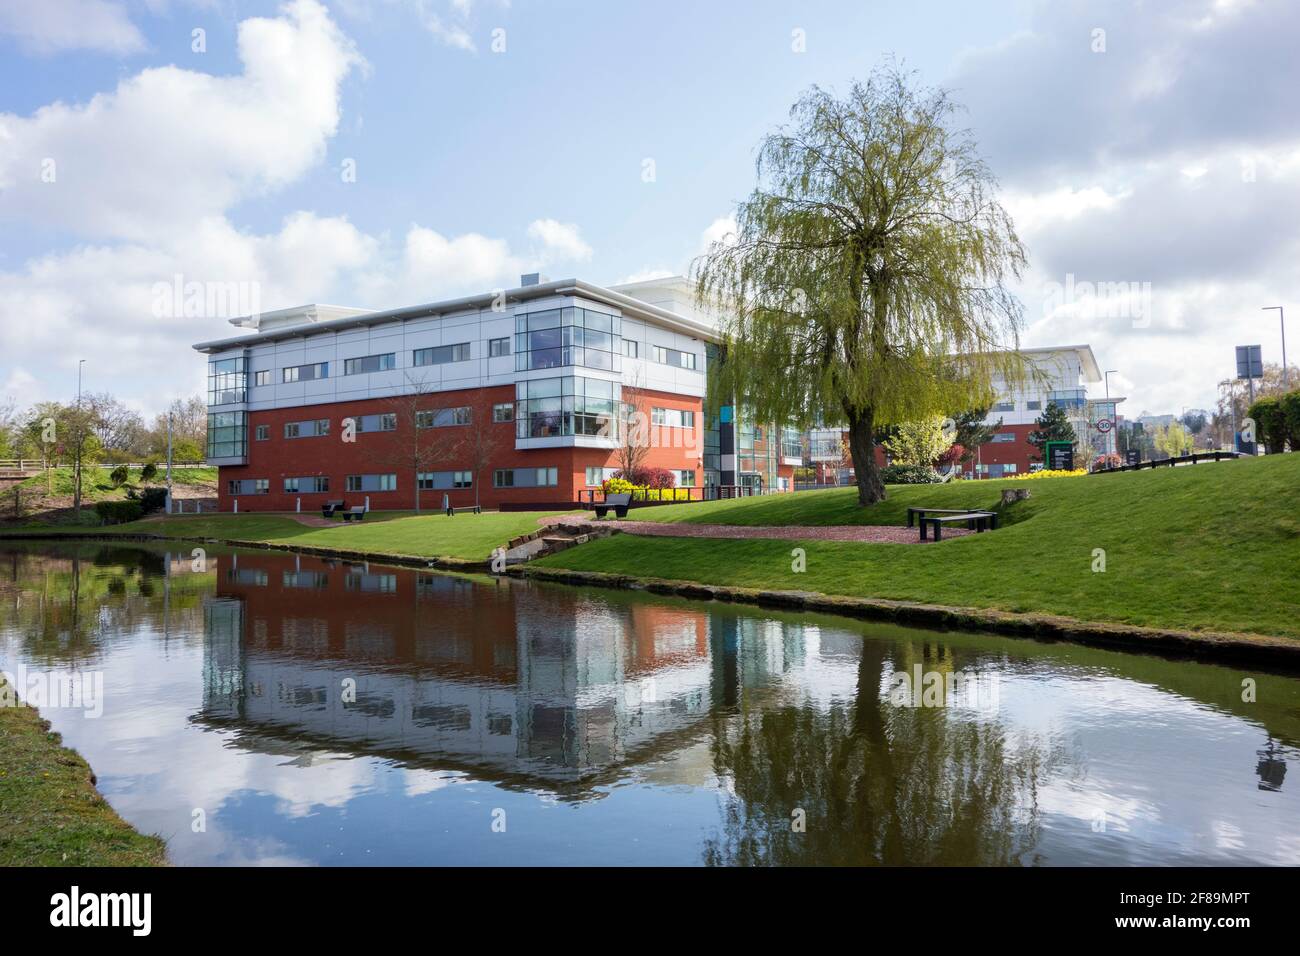 Daresbury science park also known as Sci-Tech Daresbury Enterprise on the  the Duke of Bridgewater canal near the village of Daresbury  Cheshire Stock Photo